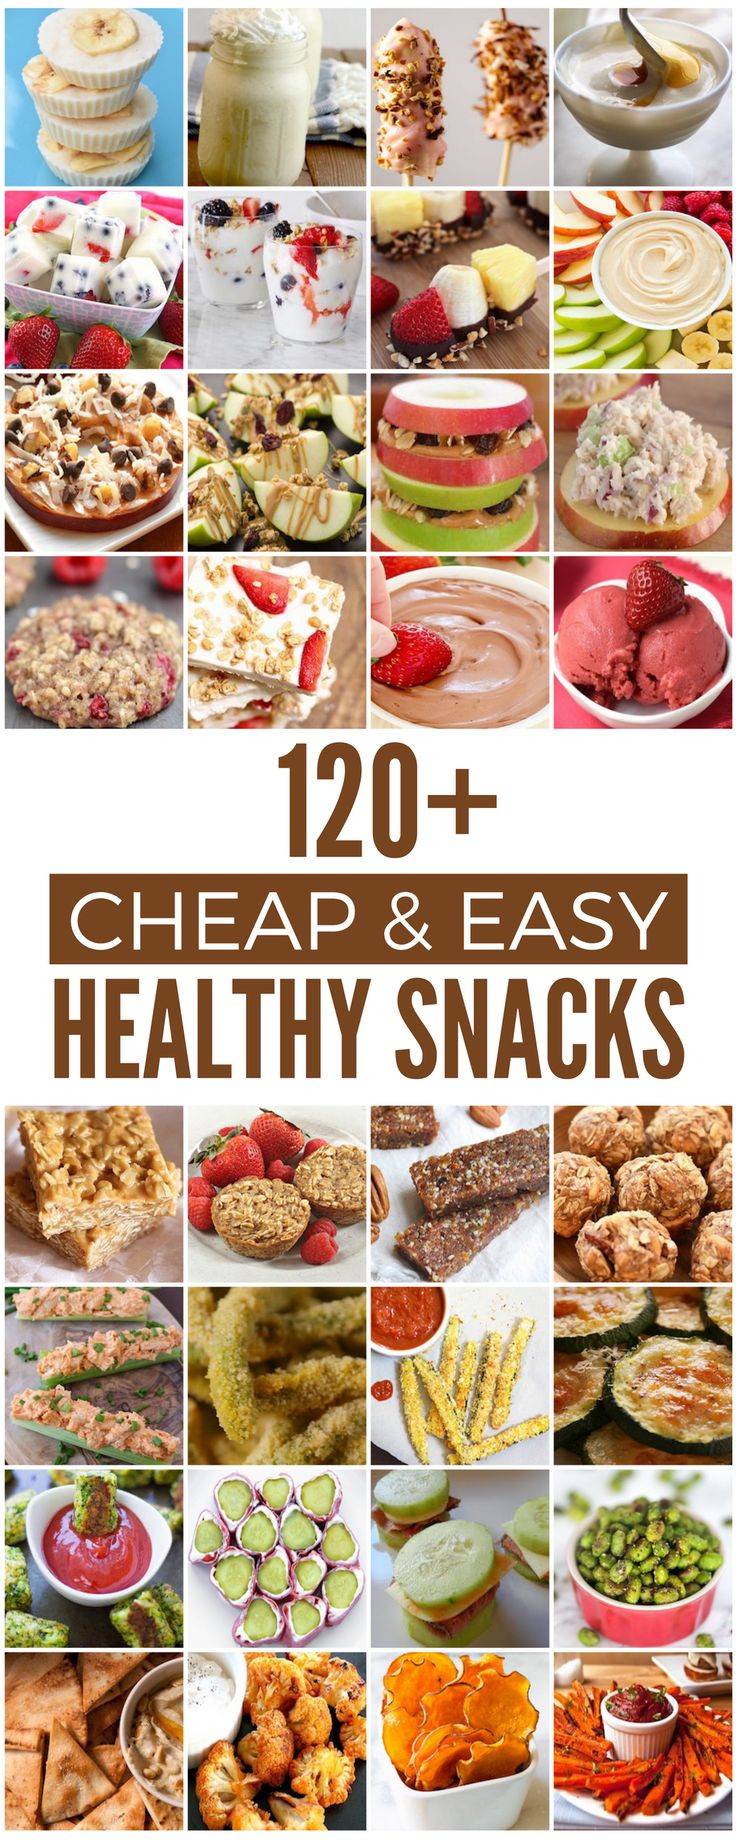 Inexpensive Healthy Snacks
 The 25 best Healthy snacks ideas on Pinterest